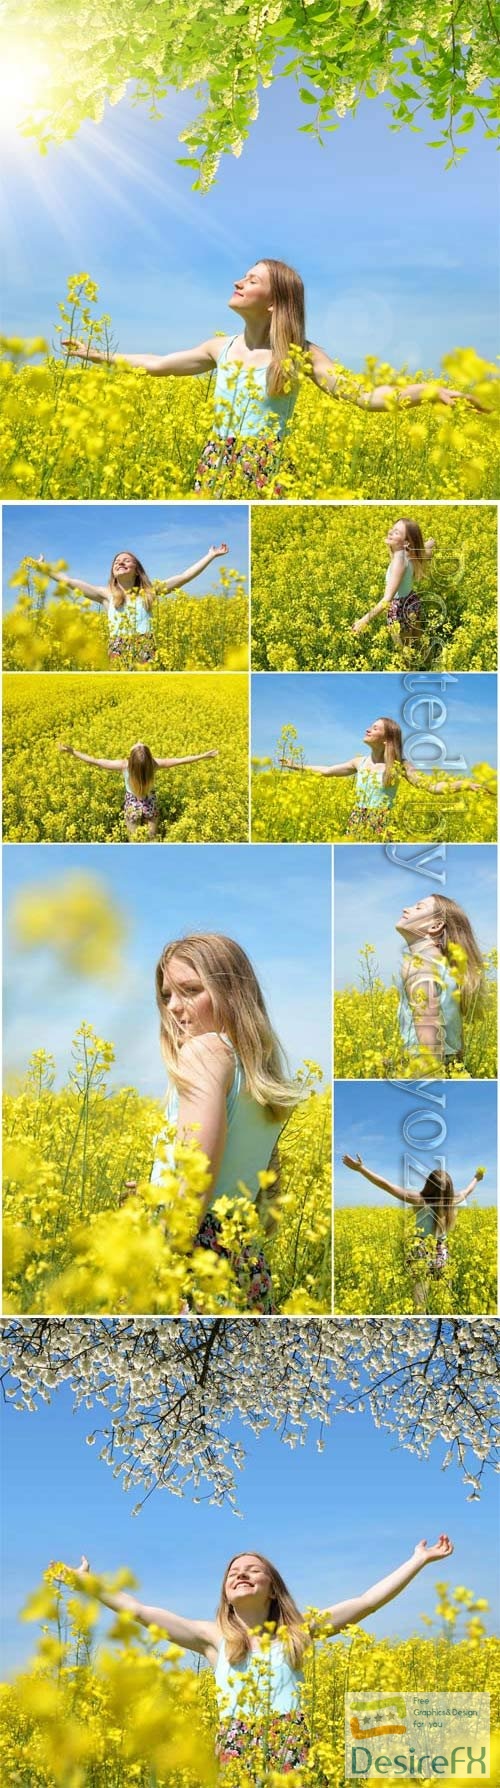 Girl in a field with yellow flowers stock photo